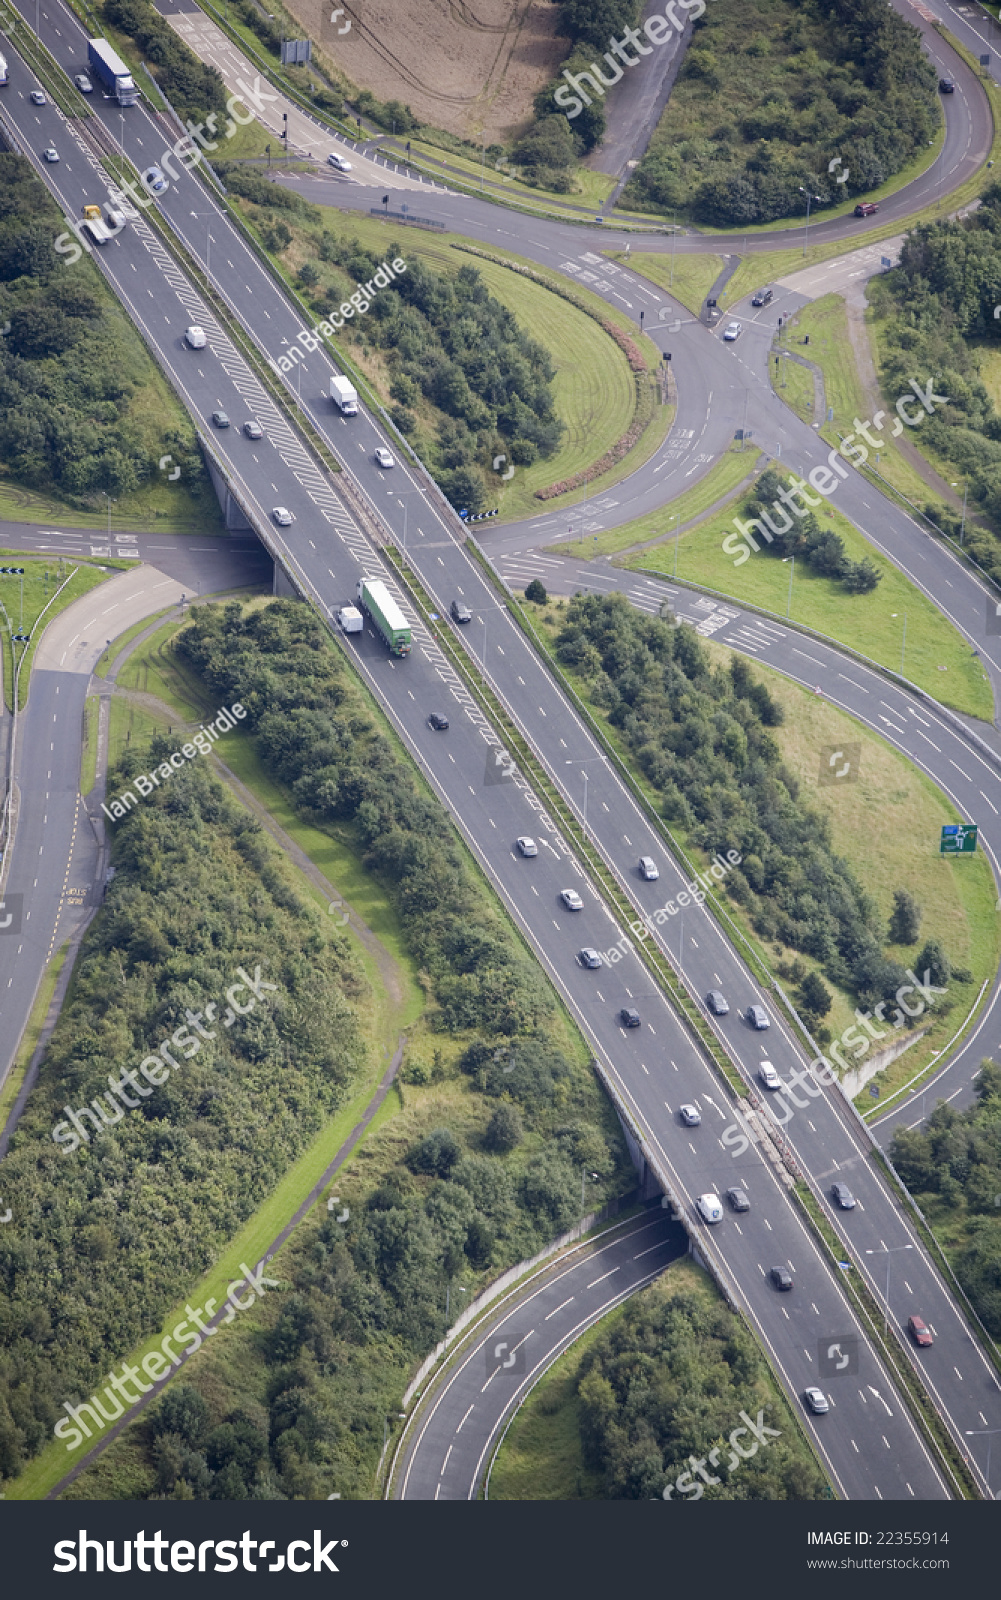 Aerial Image Of A Busy Road Junction In The North Of England. Stock ...